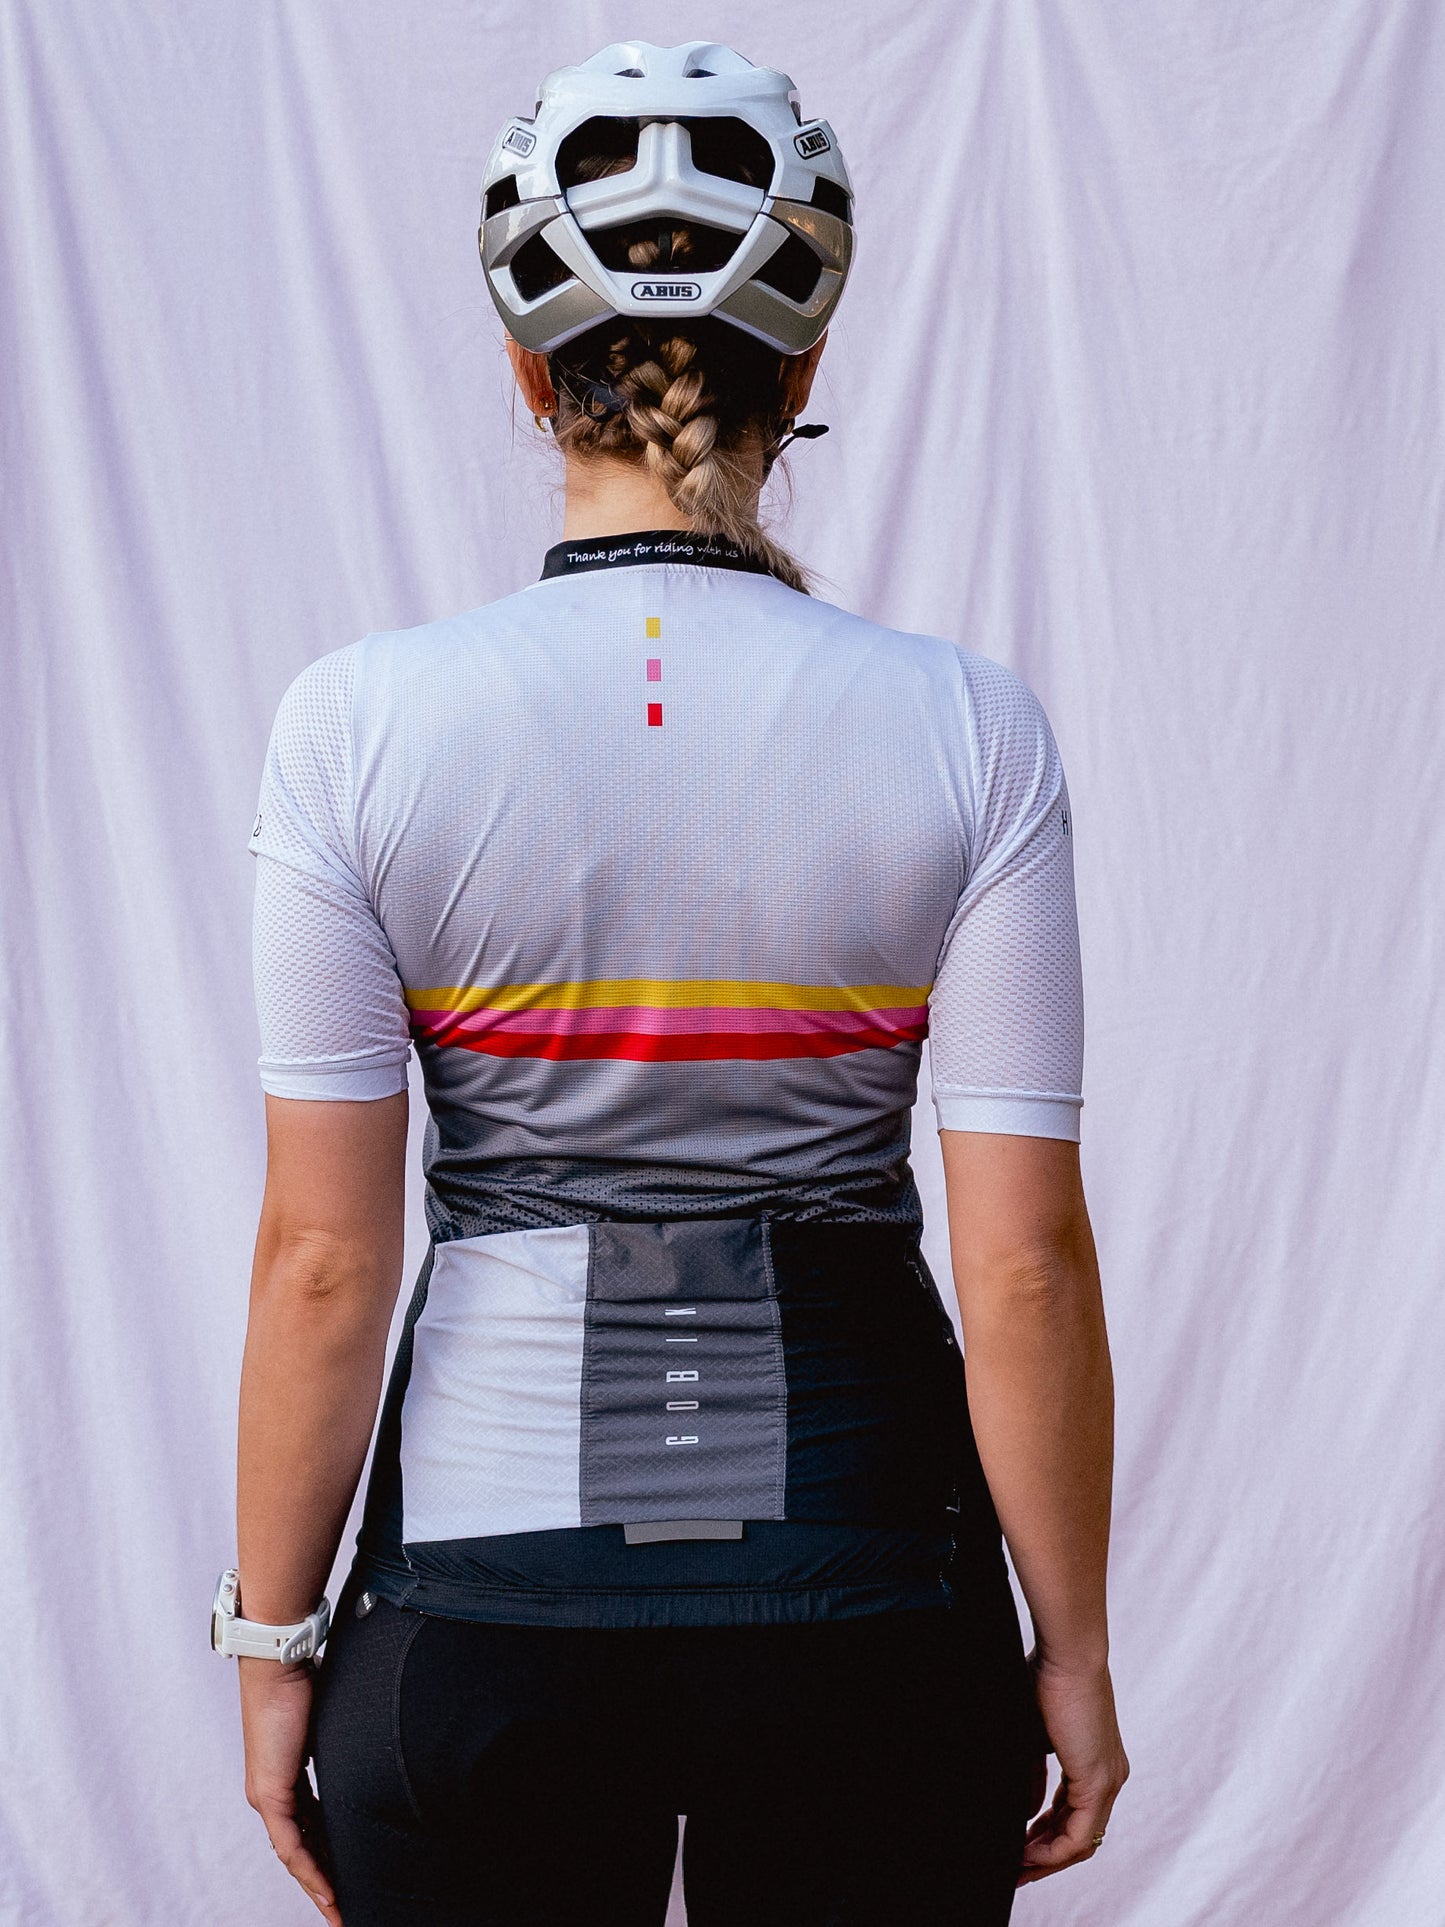 GRUPPETTO GRAND TOUR TRIBUTE JERSEY - for long rides in the summer